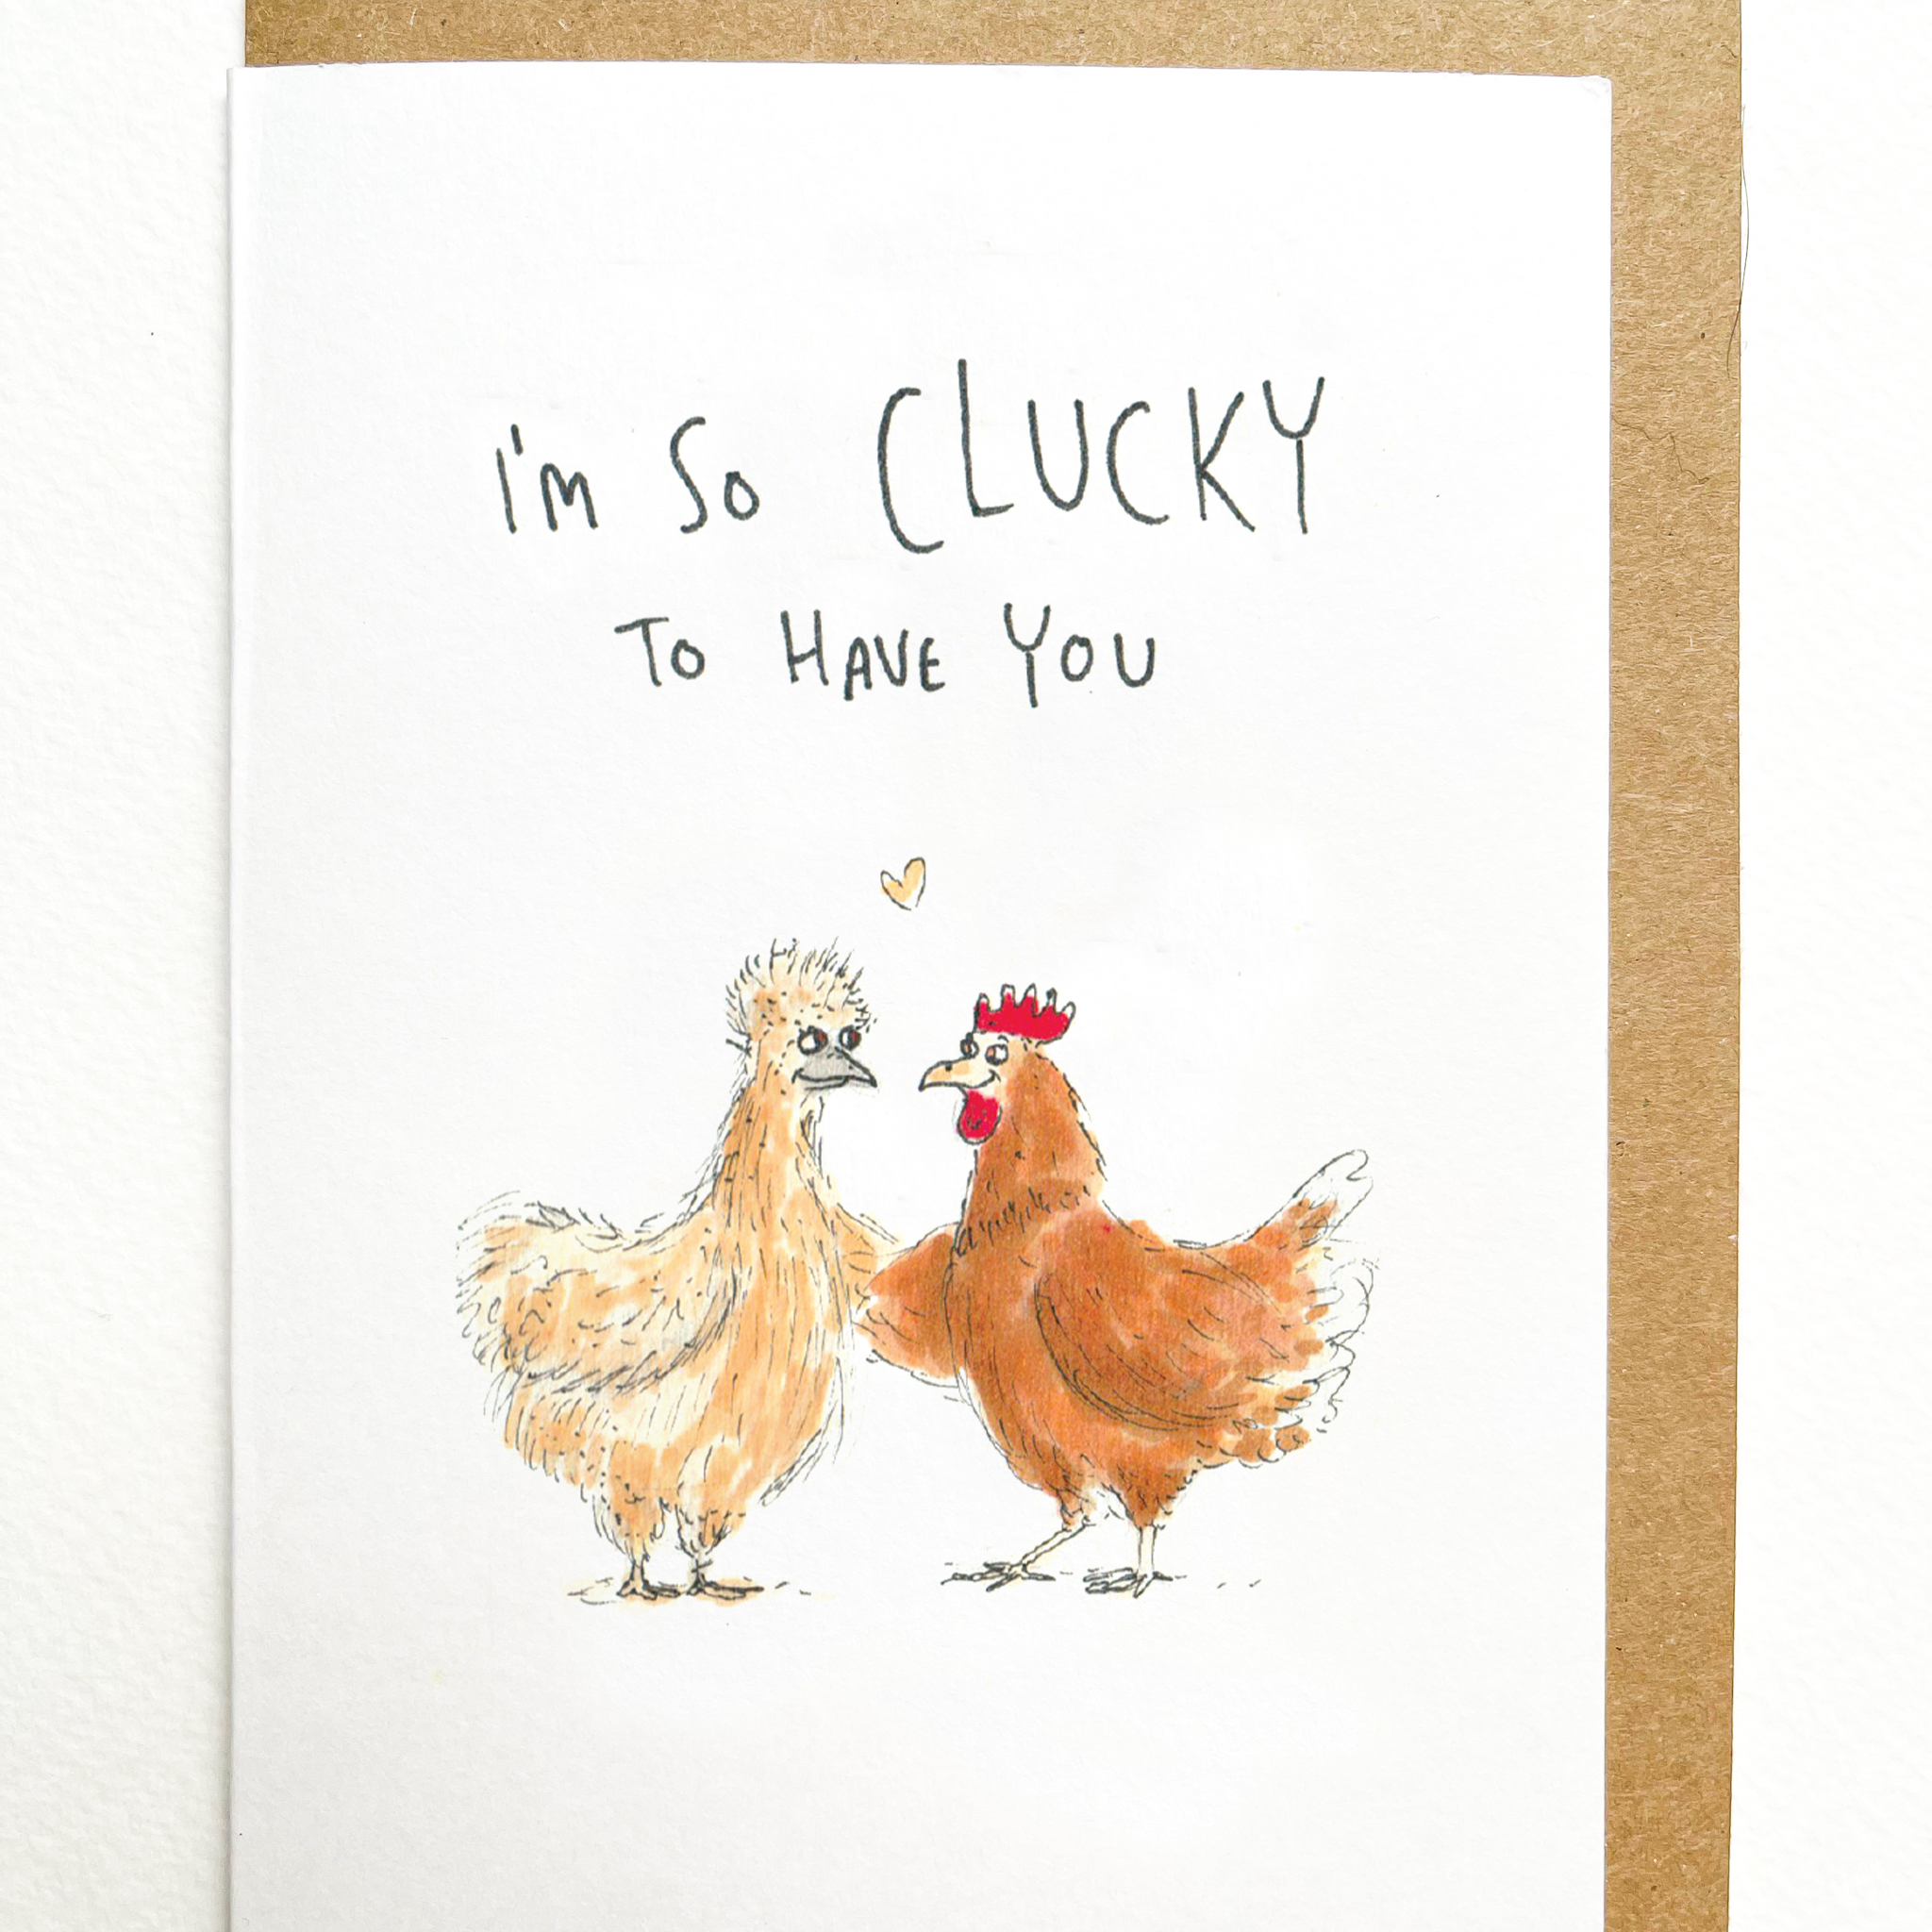 I'm so Clucky To Have You